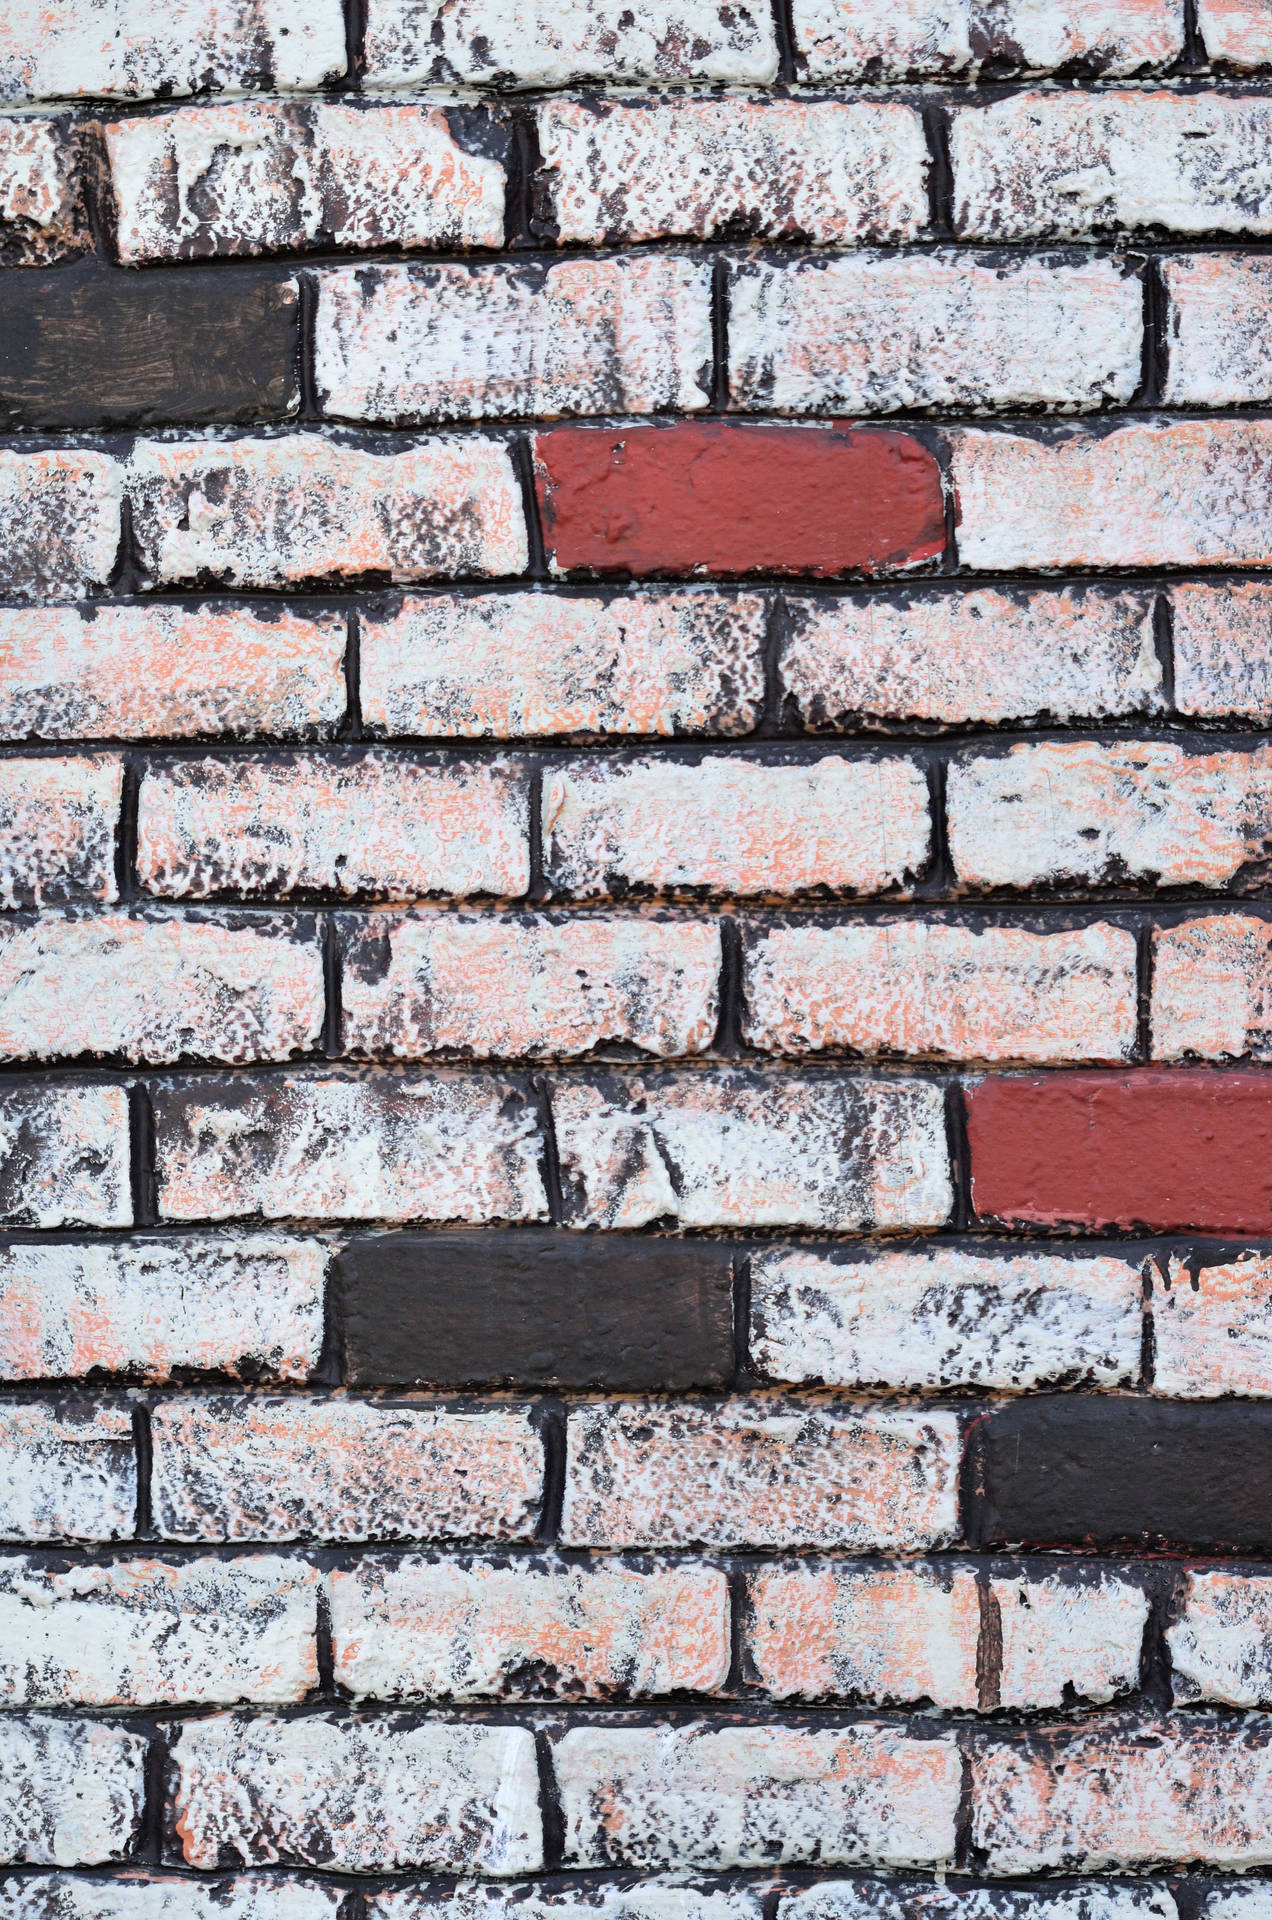 Messy Painted Brick Wall Background